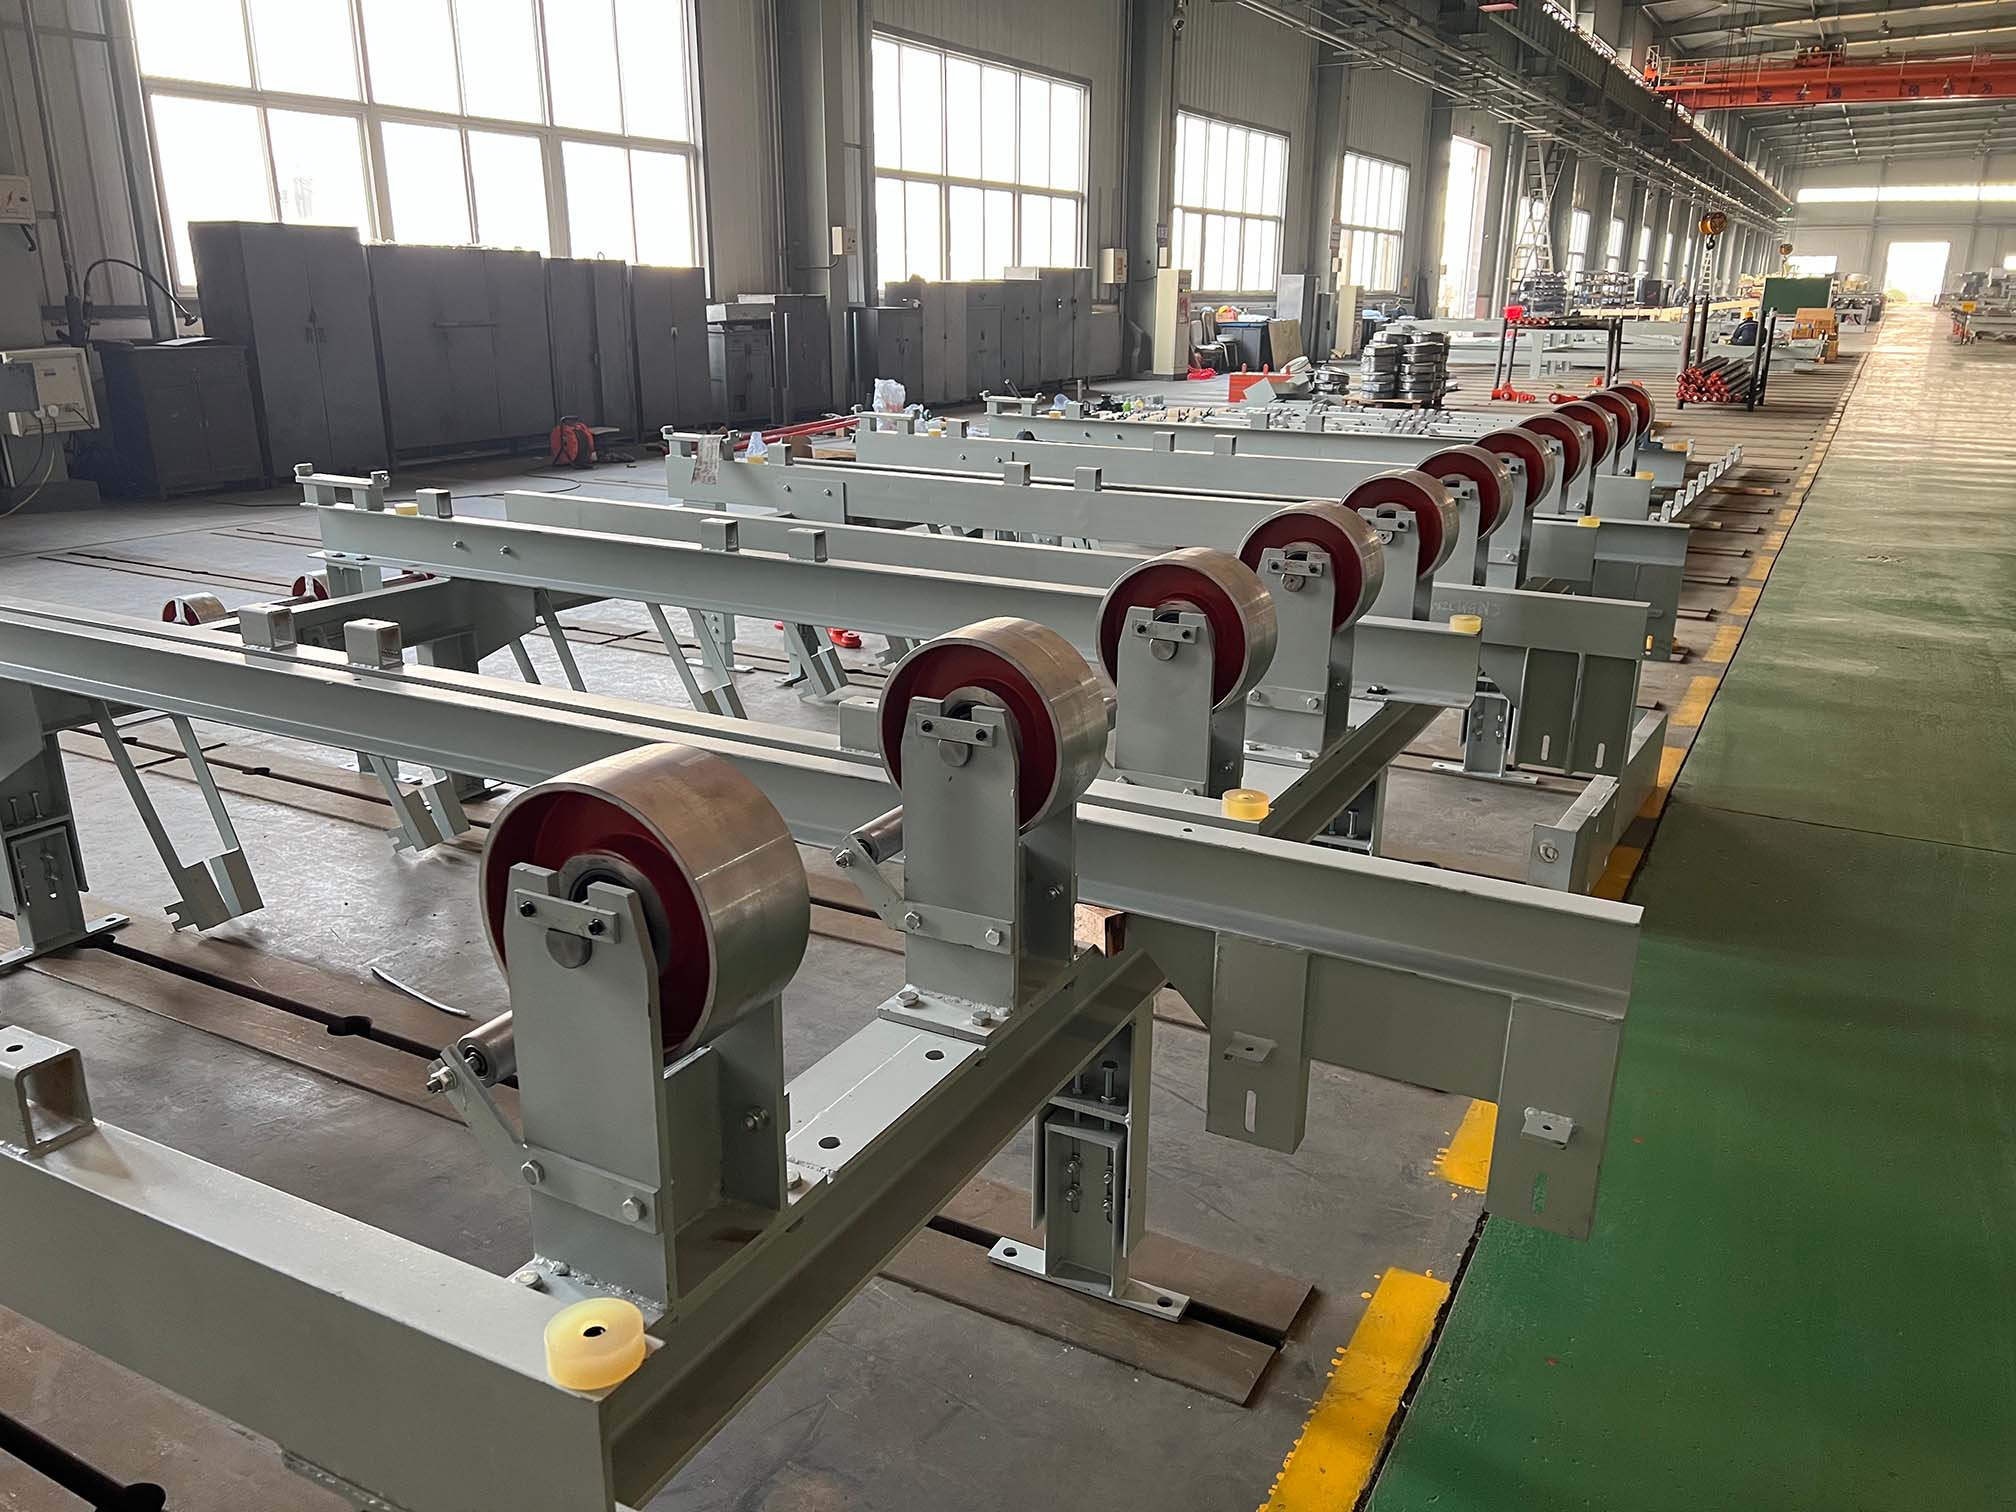 Gypsum board production line equipment enters assembly stage